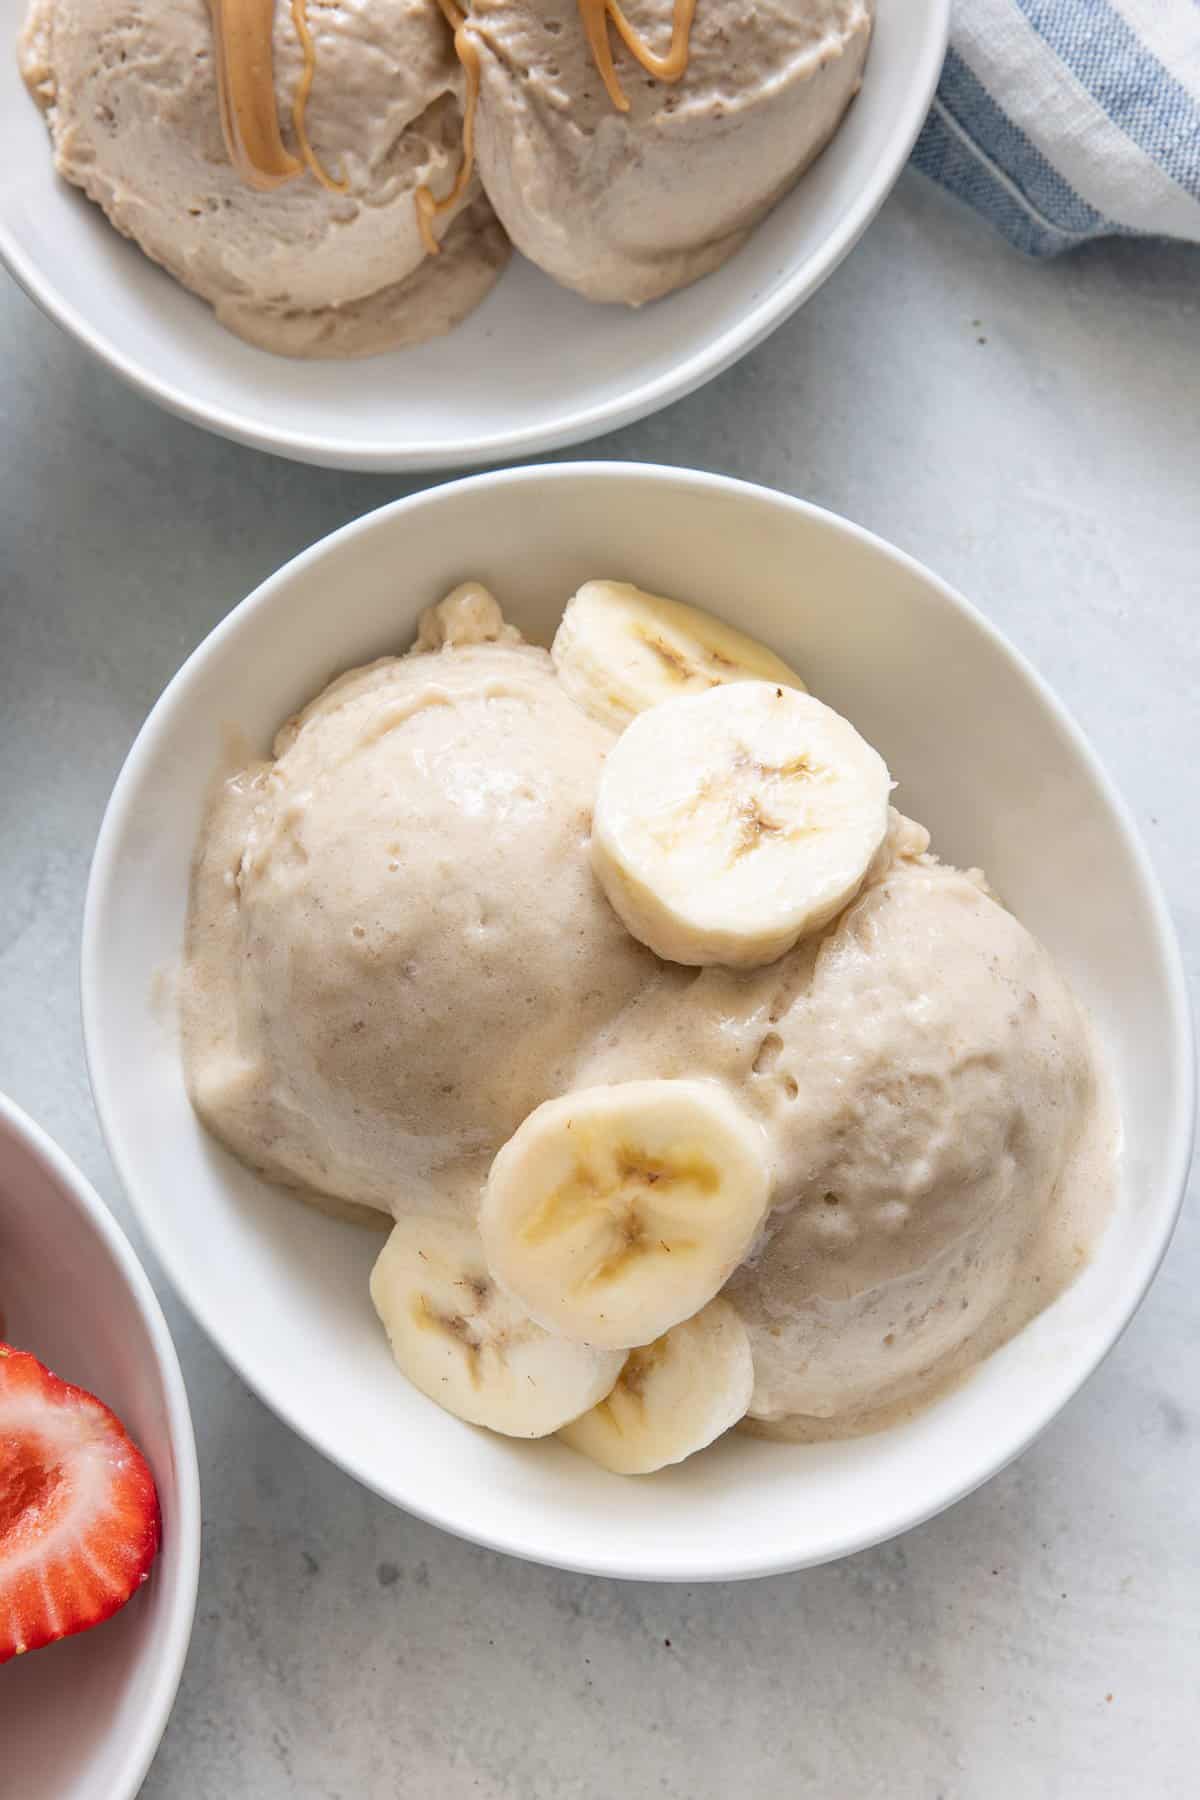 Banana vanilla Nice cream topped with banana slices with bowls of other flavored nice cream off to side.